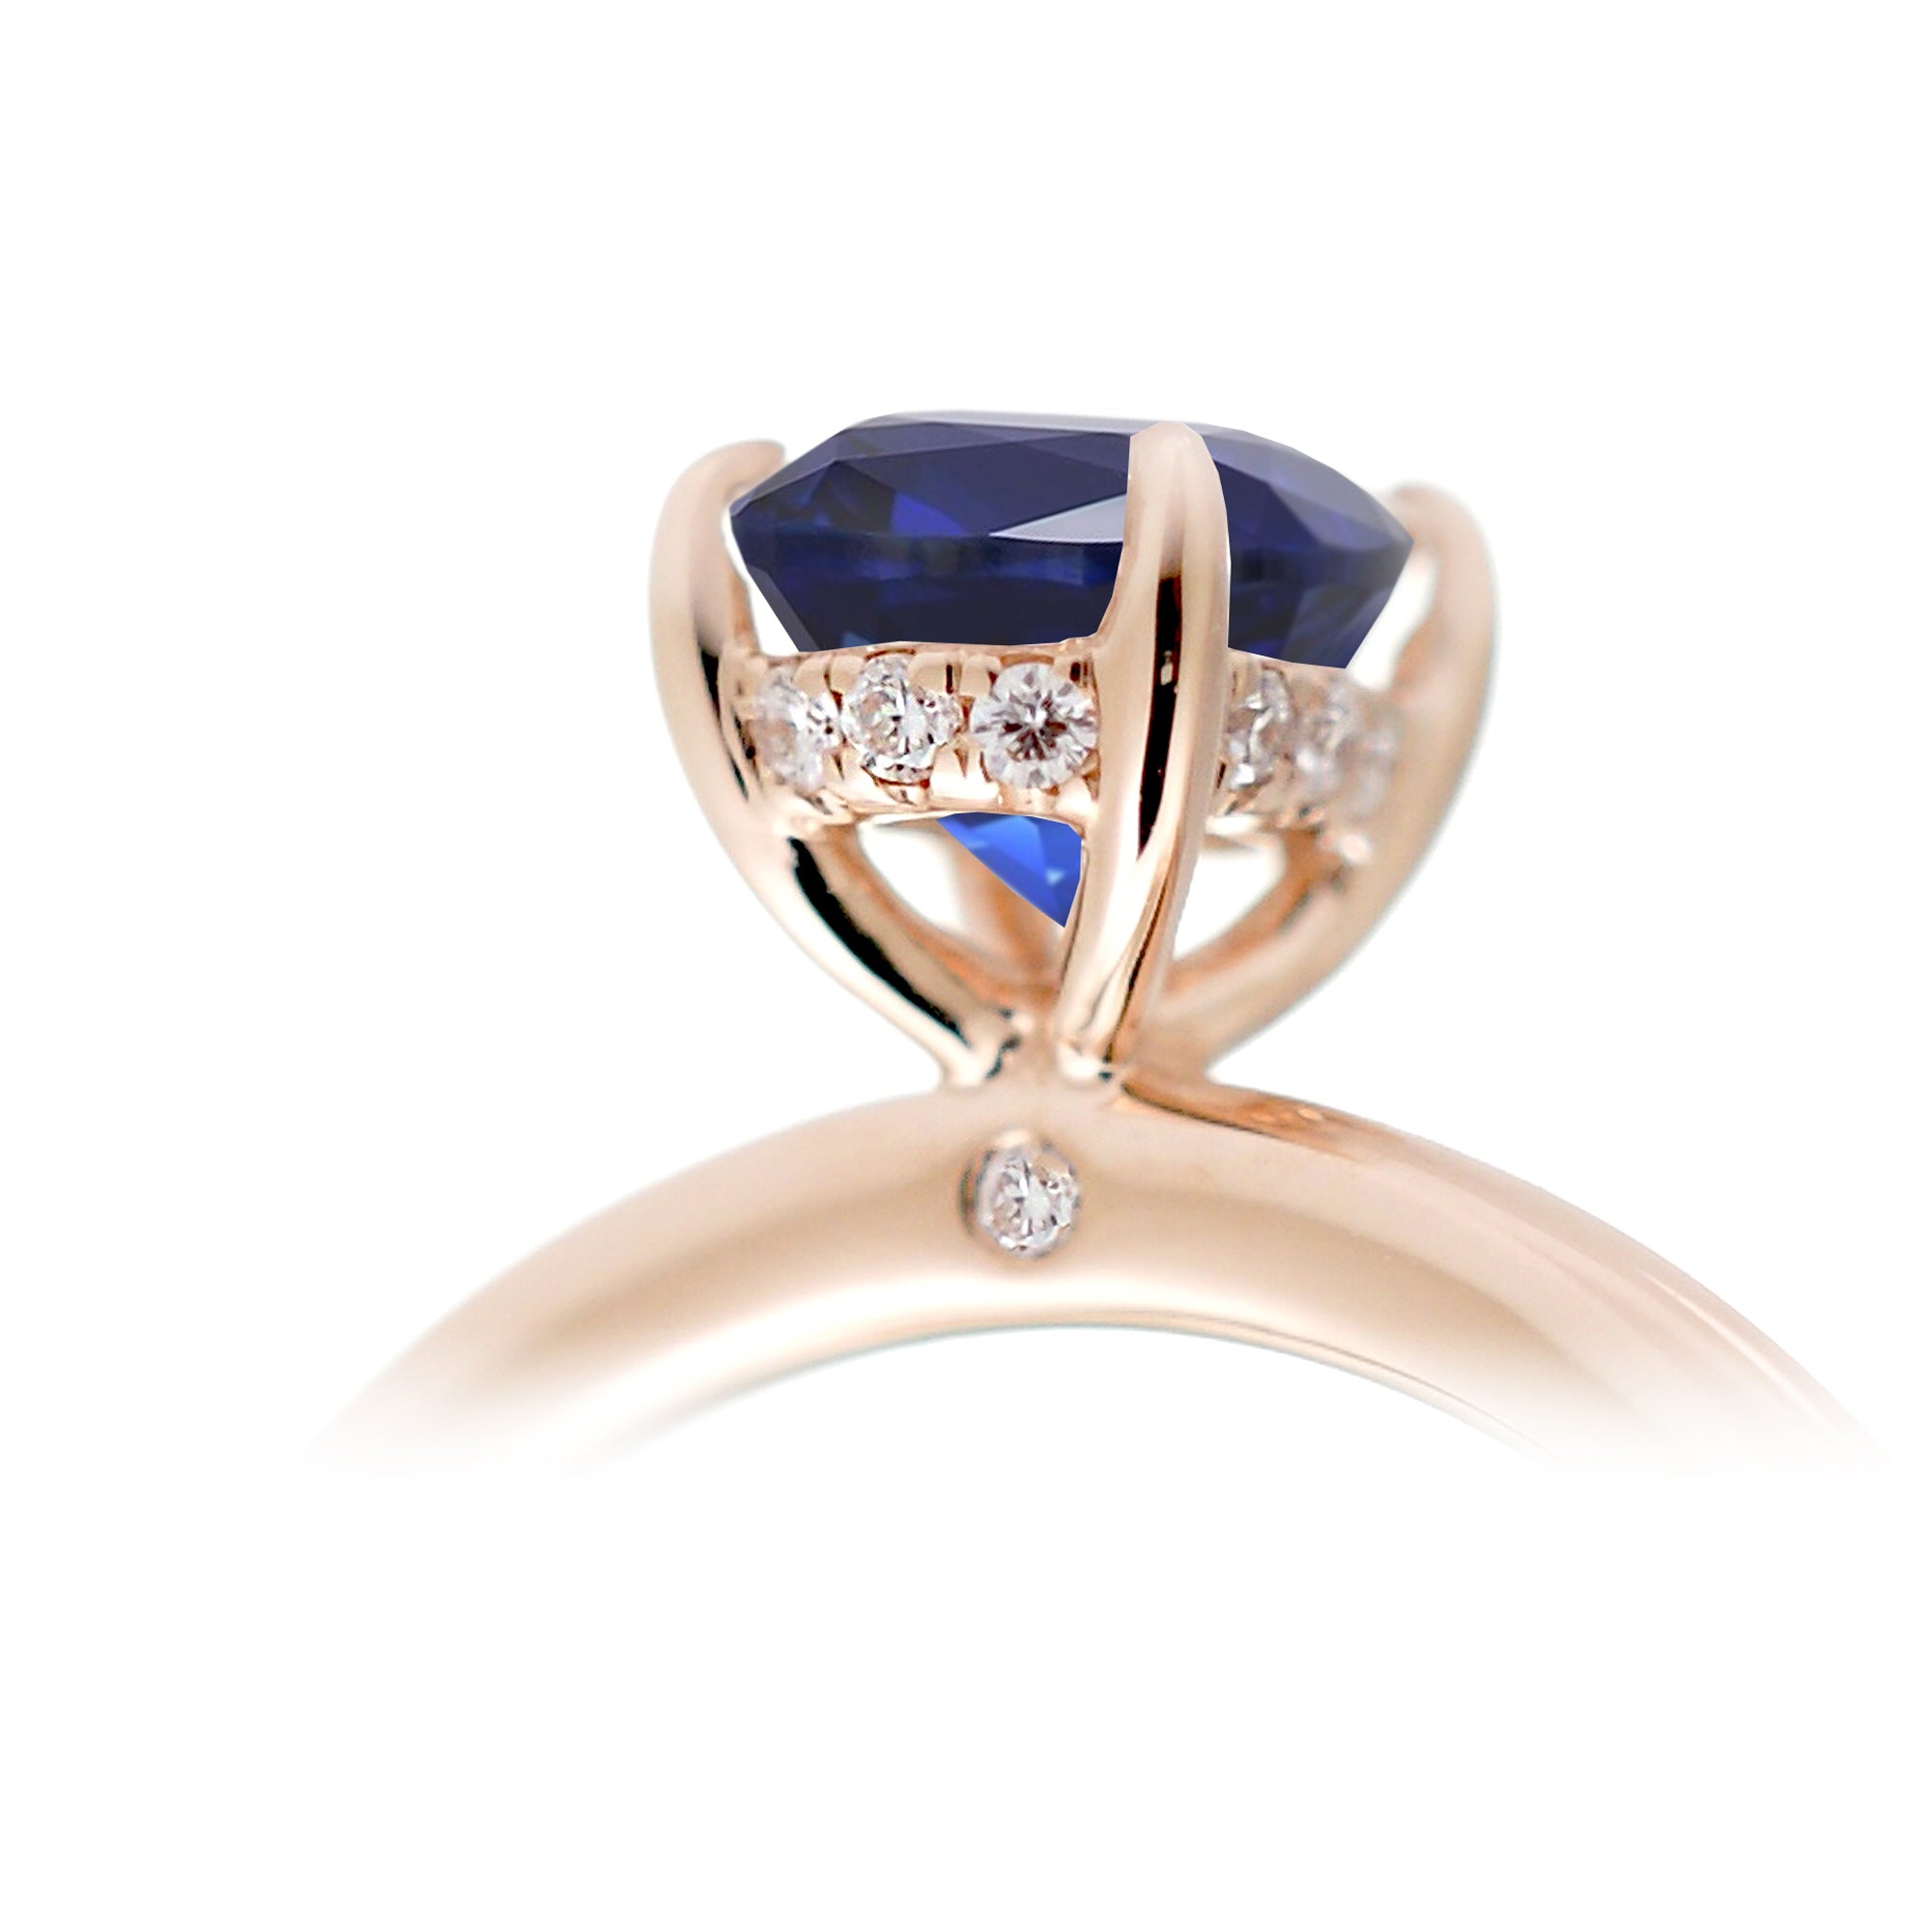 The Lucy Oval Sapphire (Lab-Grown)